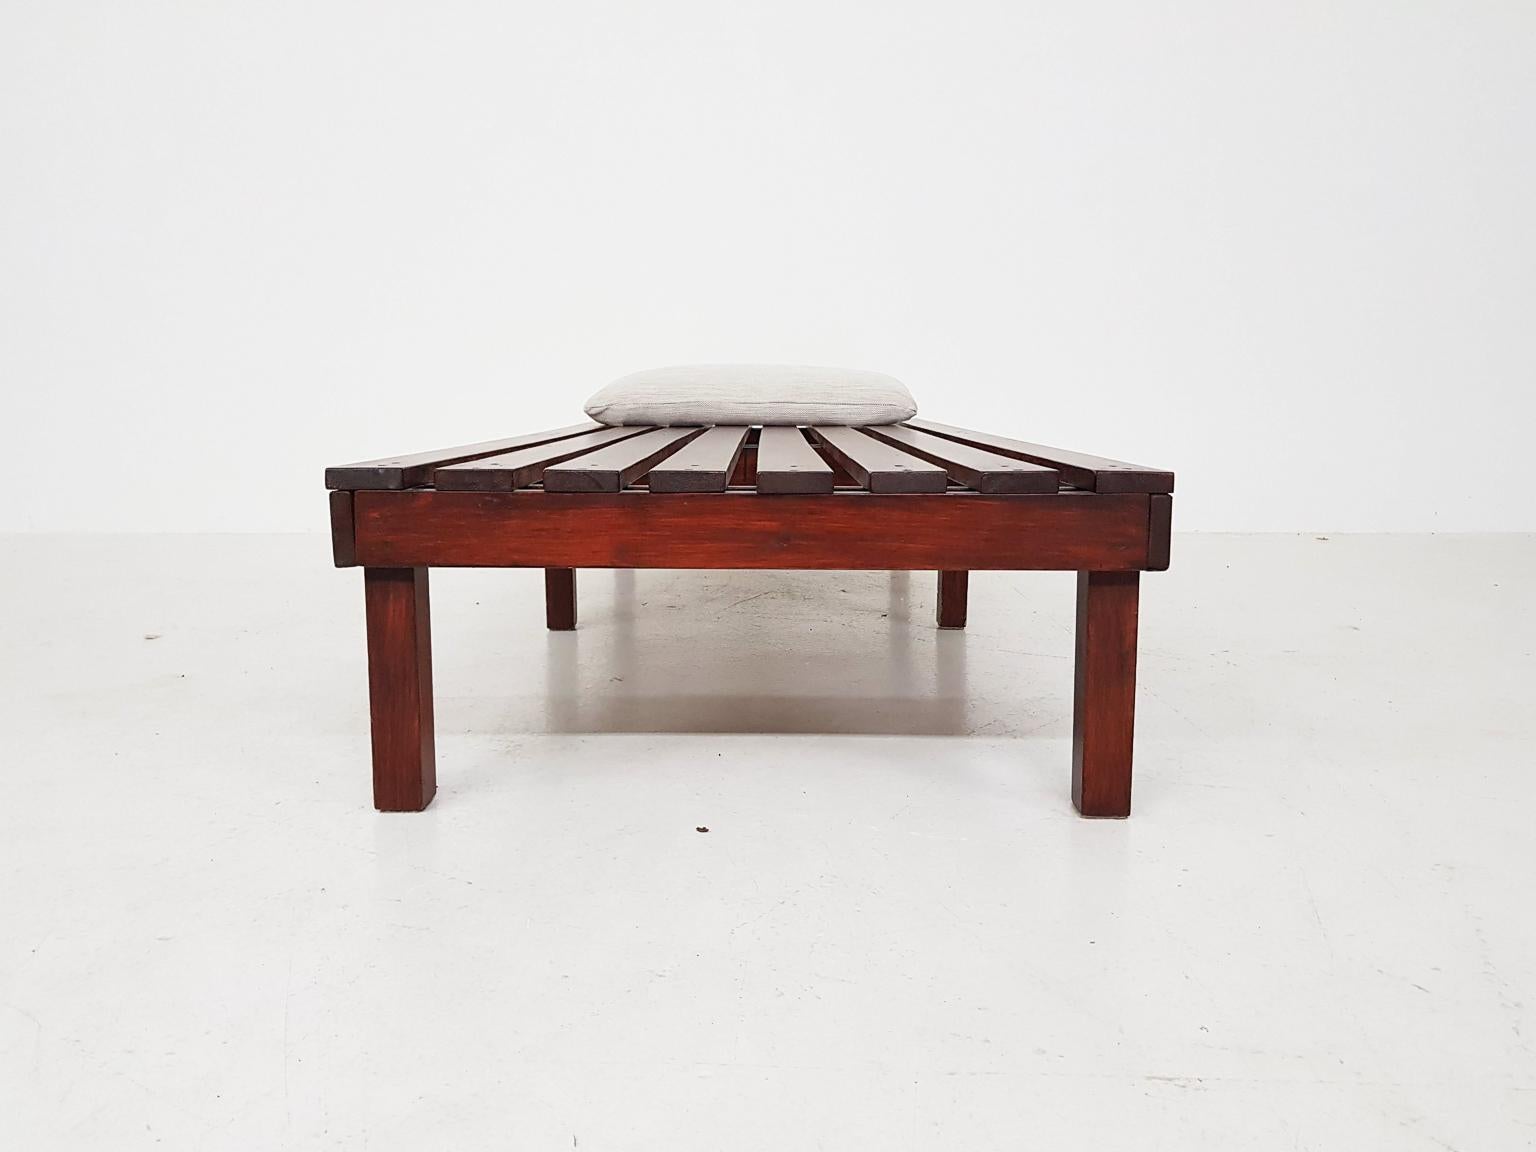 Martin Visser or Charlotte Perriand Style Slat Bench or Daybed, Dutch, 1950s (Holz)